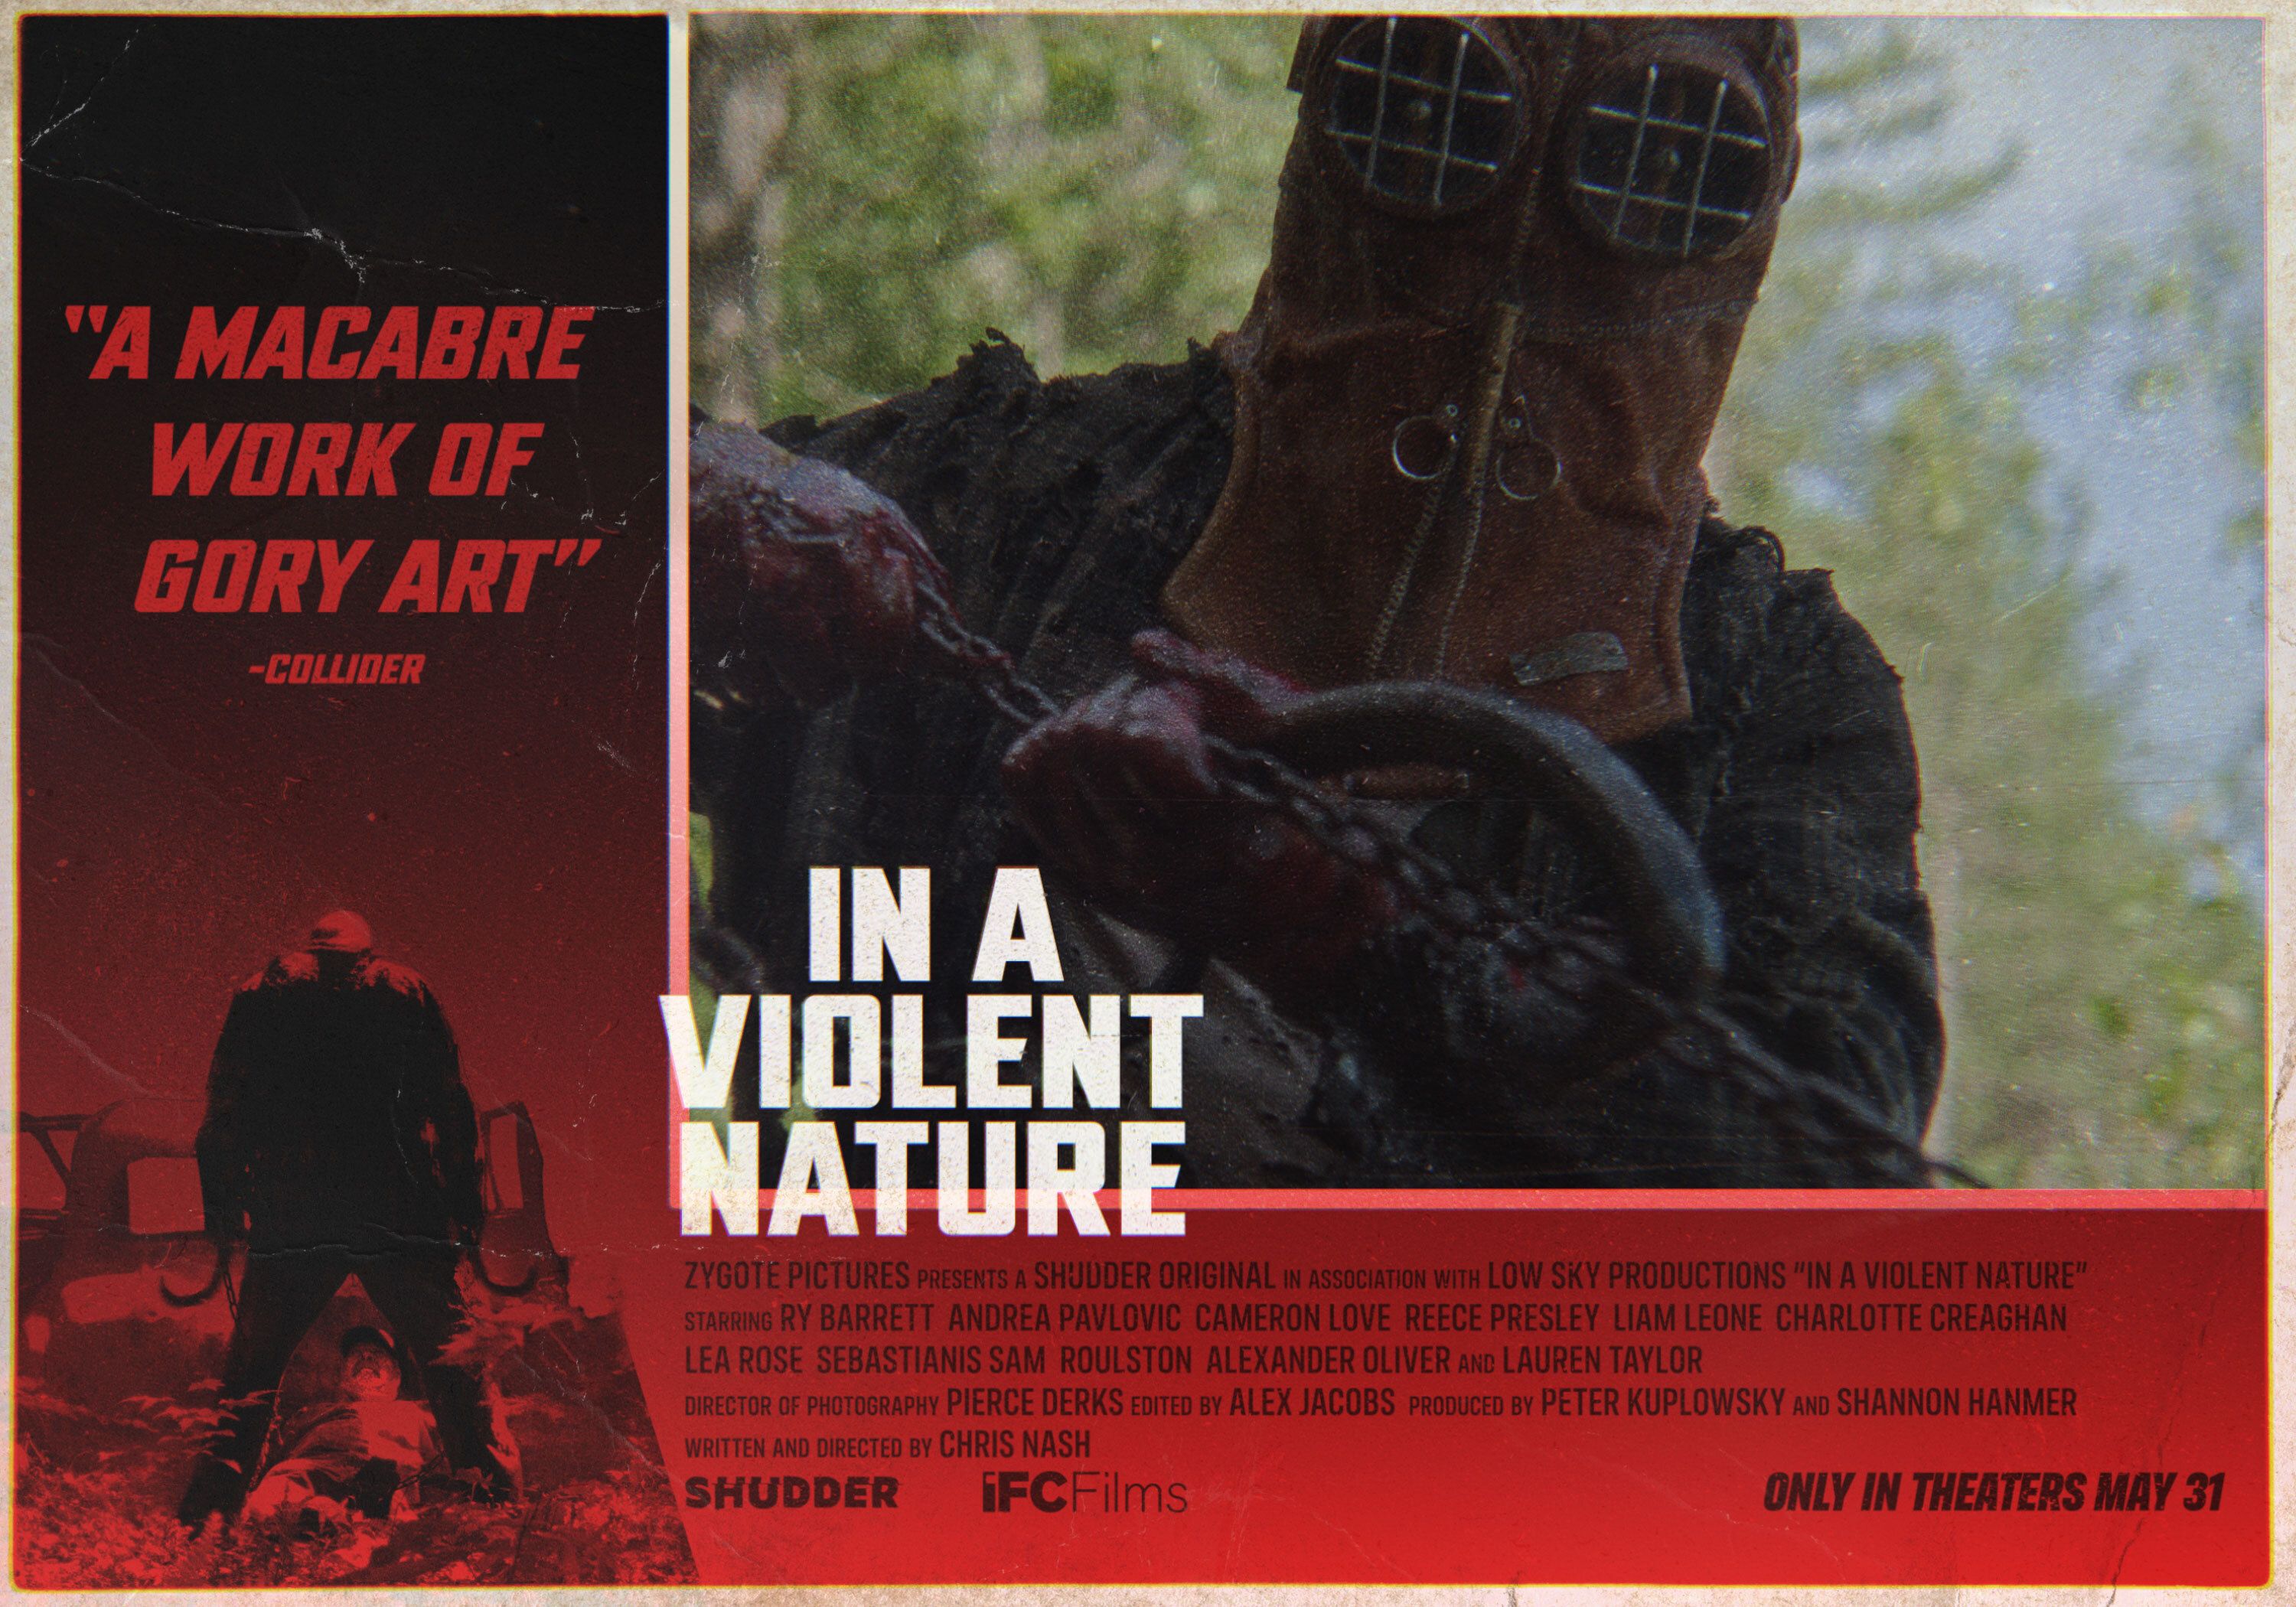 in-a-violent-nature-lobby-card-collider